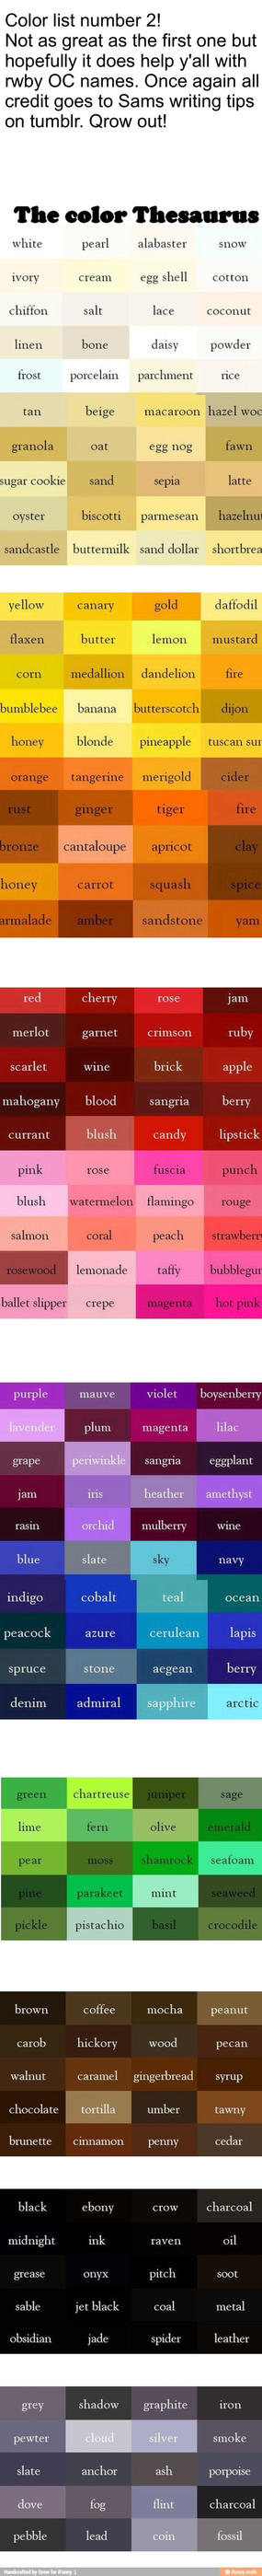 Tumblr- The Color Thesaurus by nerdybirdy679 on DeviantArt